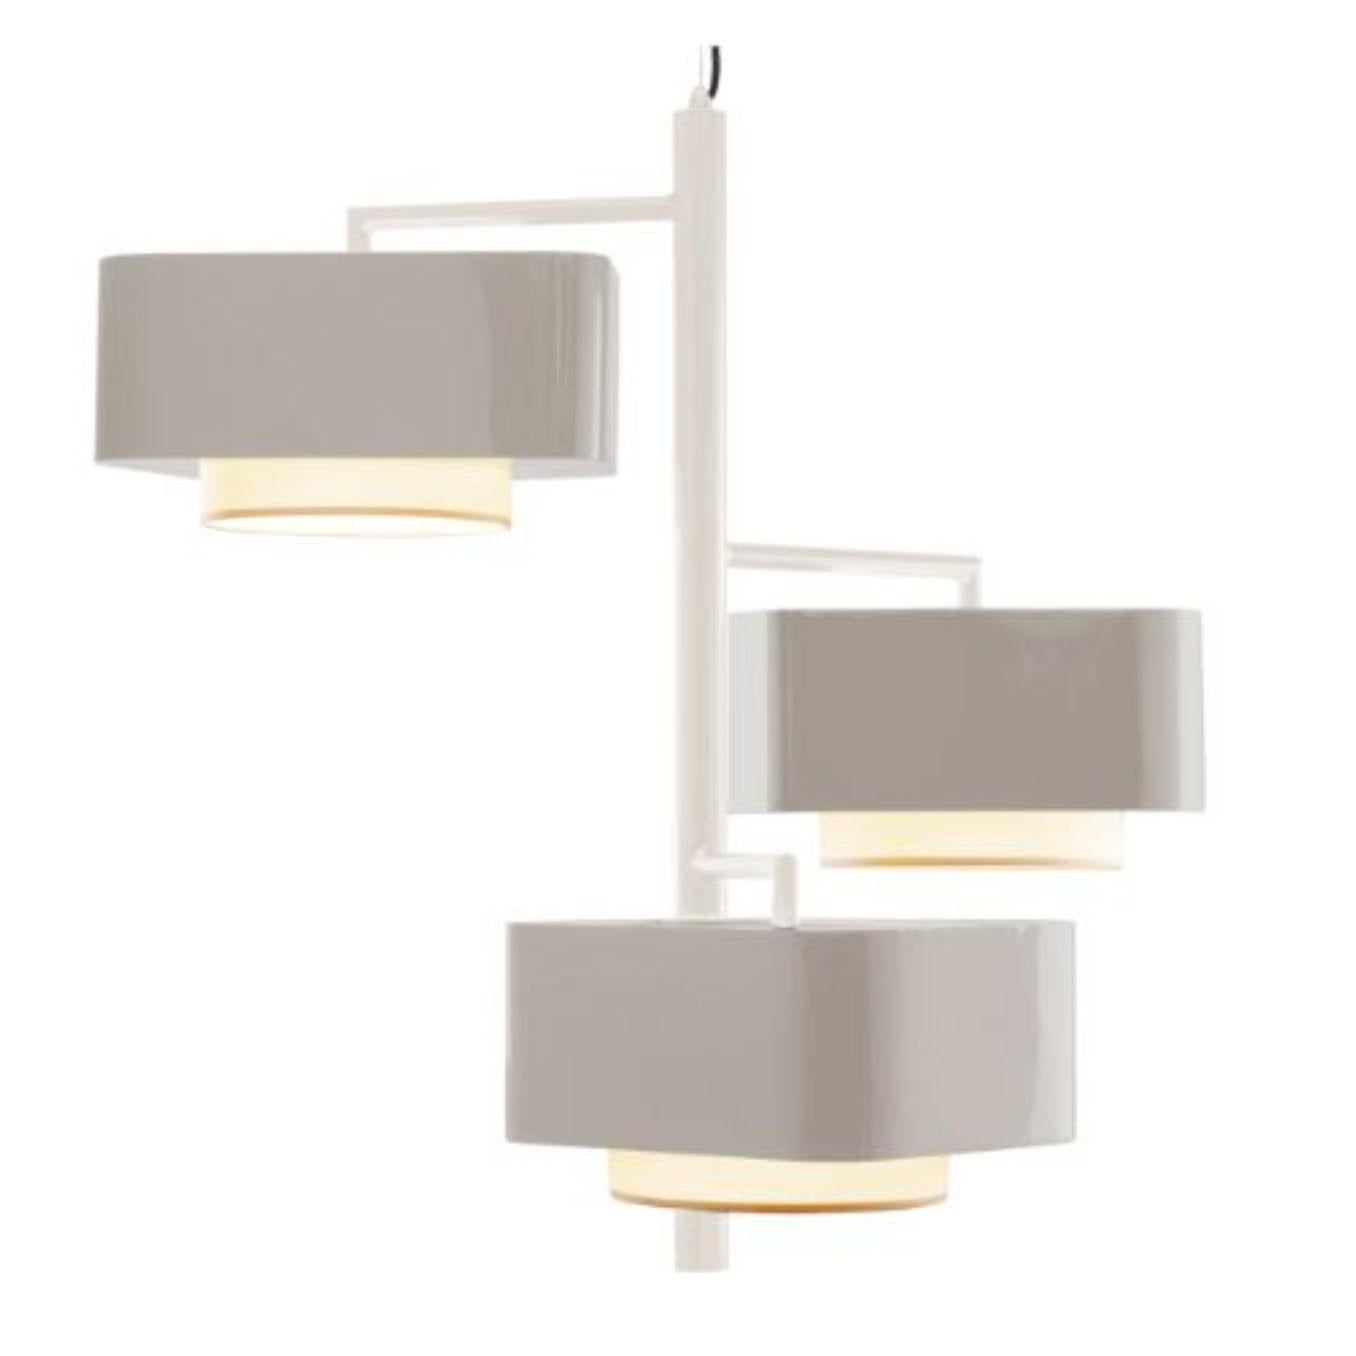 Ivory and Taupe Carousel I Suspension lamp by Dooq
Dimensions: W 97 x D 97 x H 86 cm
Materials: lacquered metal.
abat-jour: cotton
Also available in different colors.

Information:
230V/50Hz
E27/3x20W LED
120V/60Hz
E26/3x15W LED
bulbs not